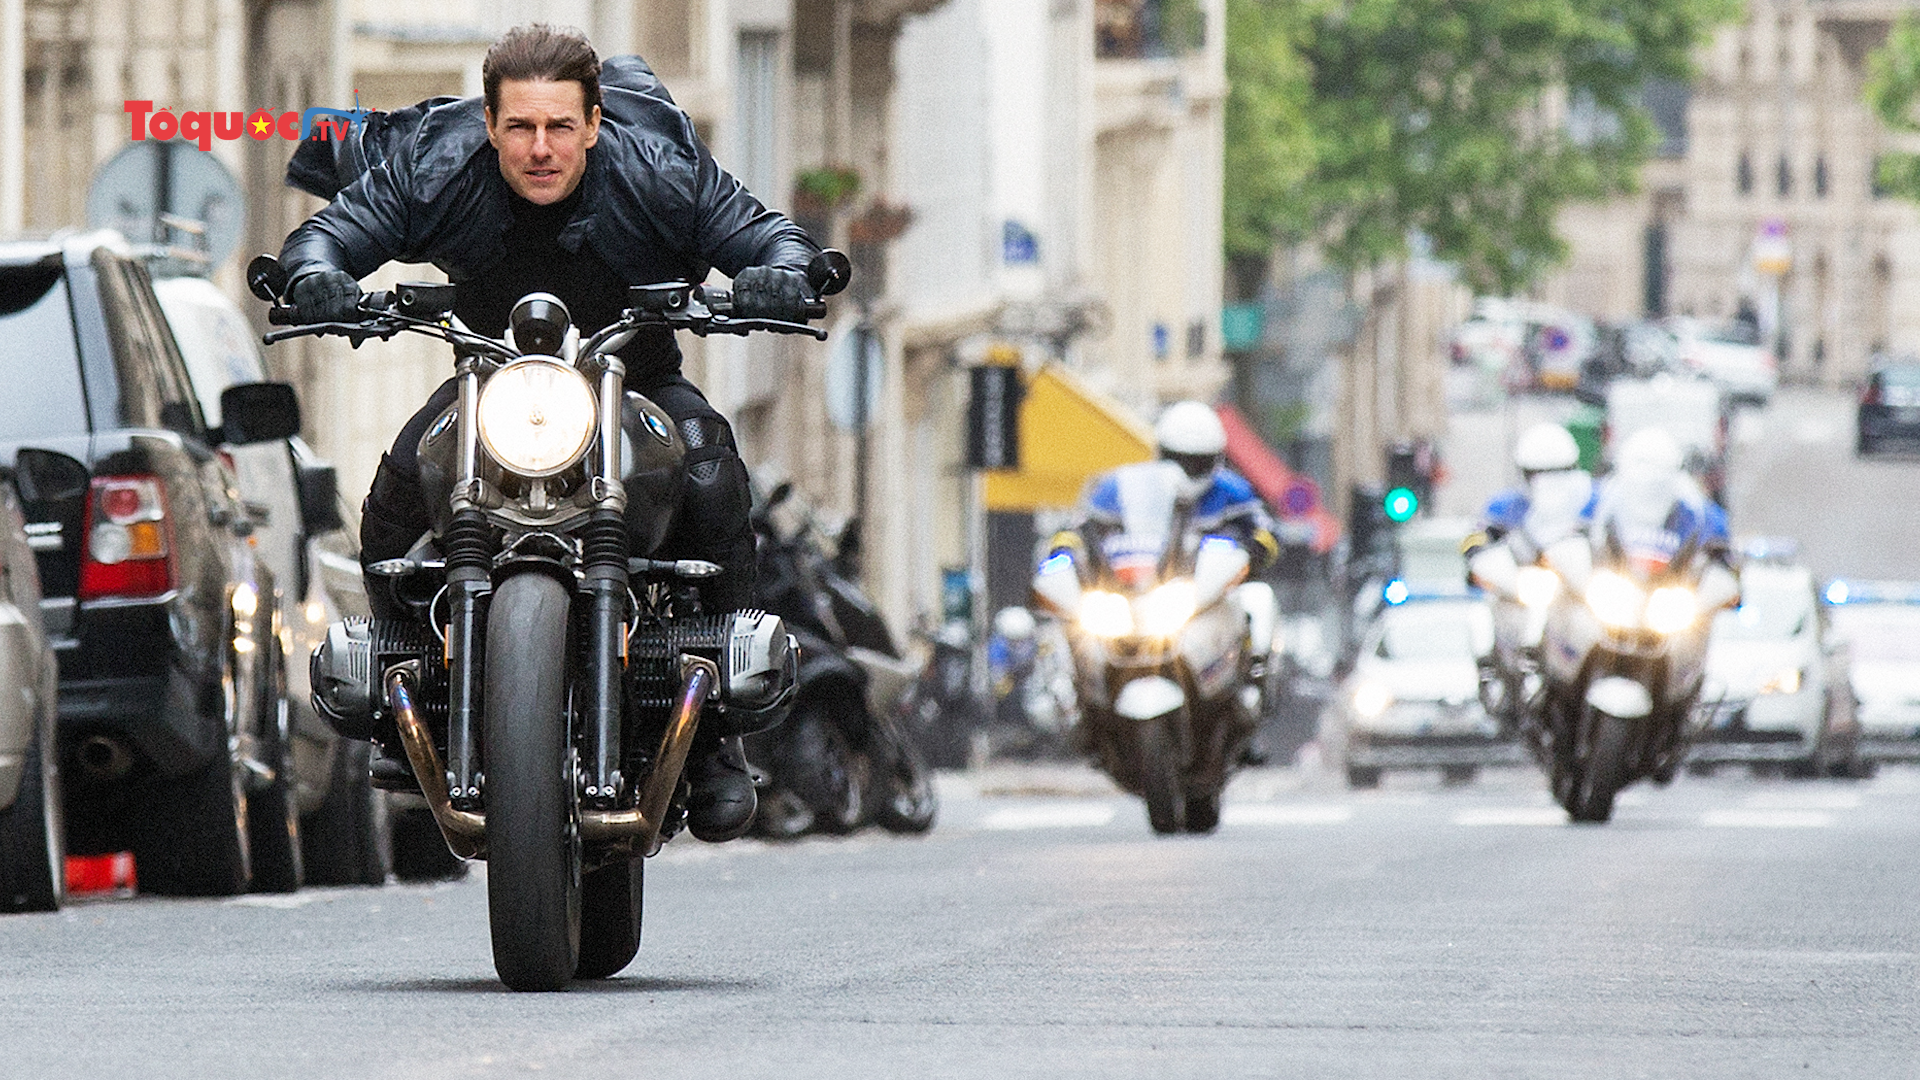 Tạm dừng quay “Mission: Impossible 7” do Covid-19